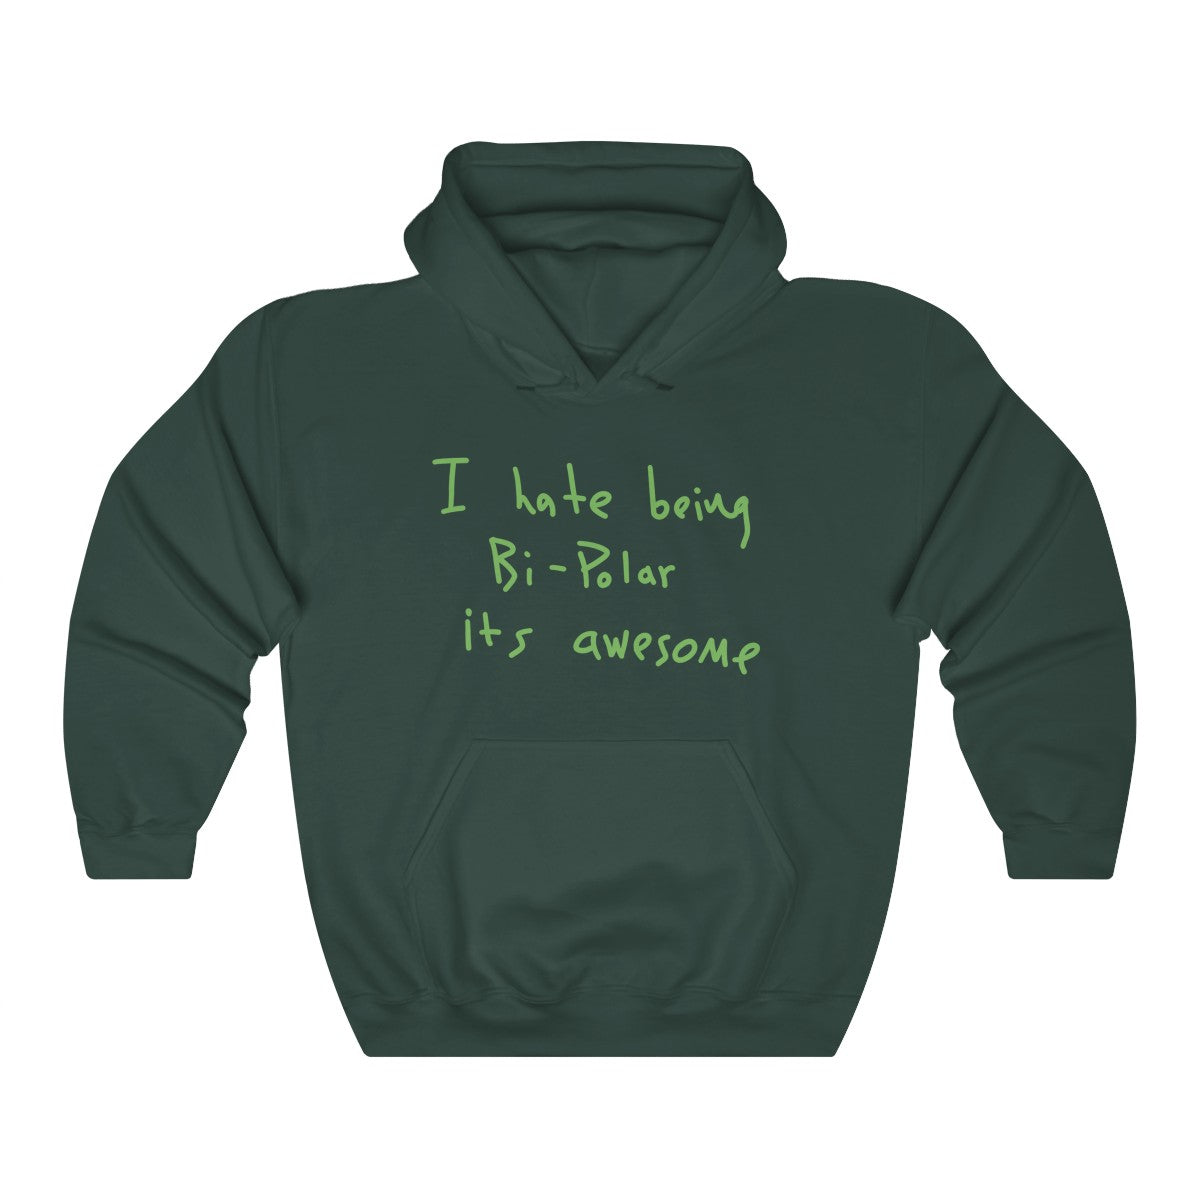 I hate being Bi-Polar it's awesome Kanye West inspired Heavy Blend™ Hoodie-Forest Green-S-Archethype